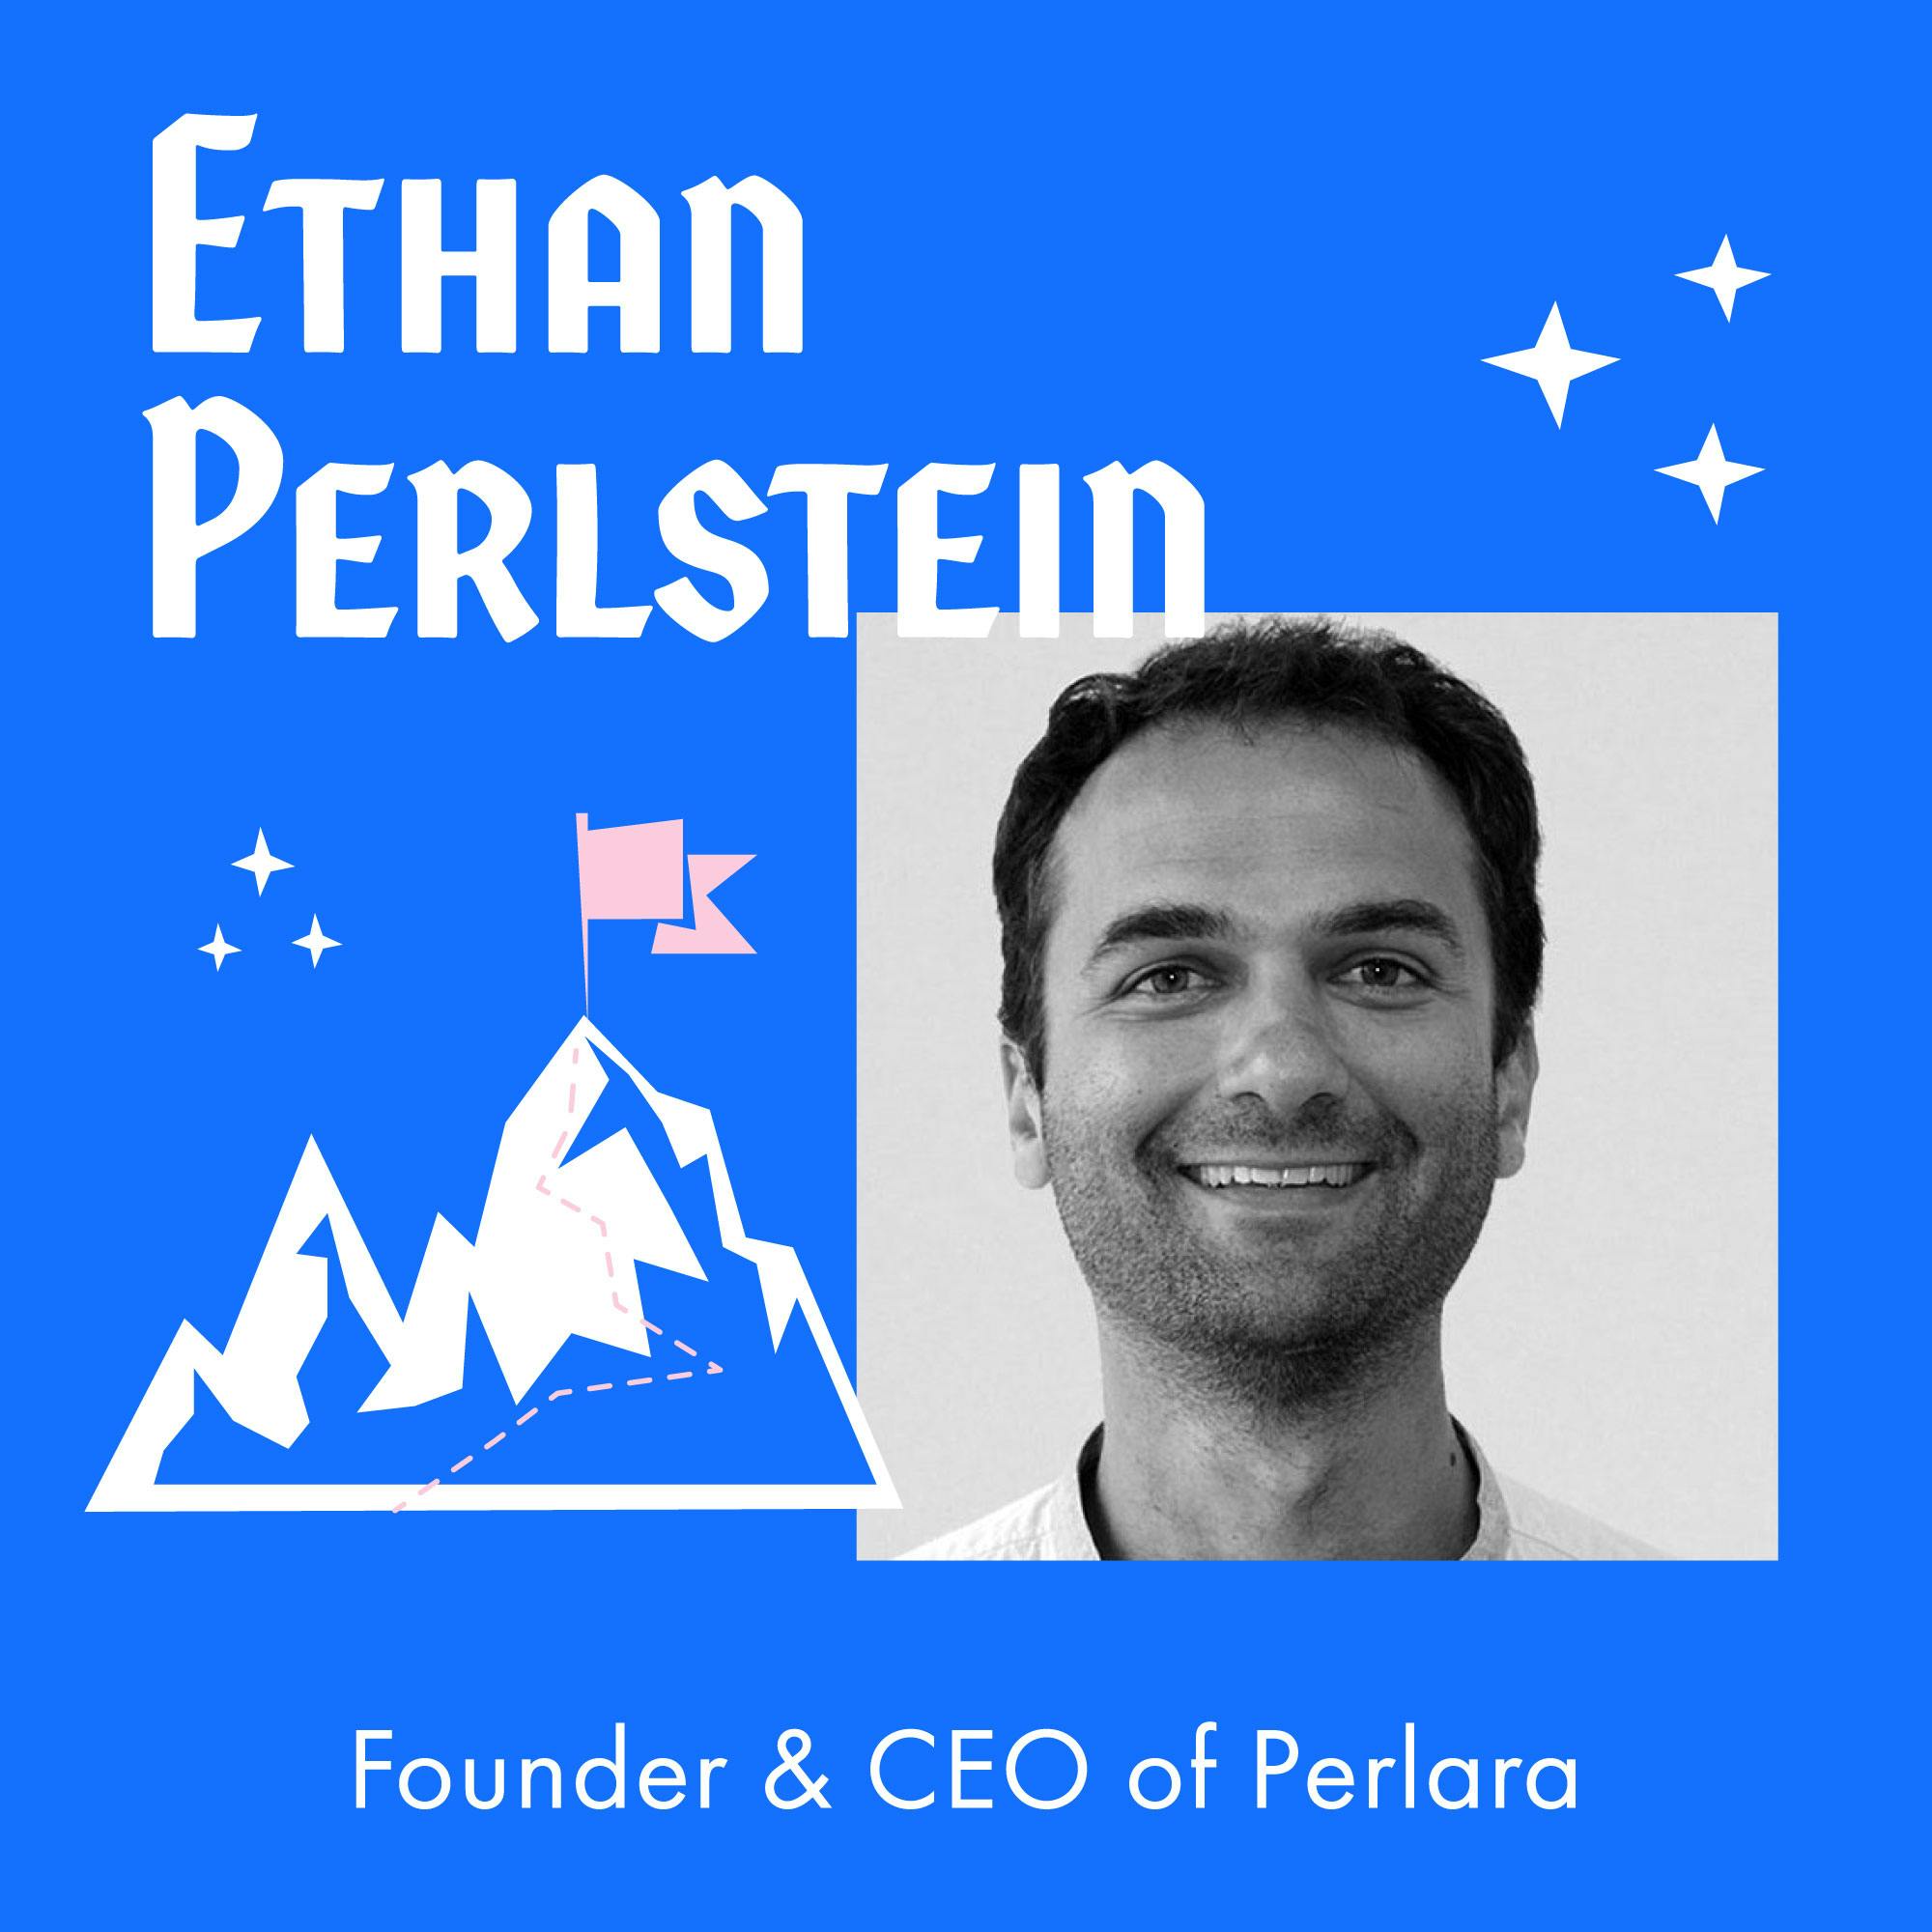 Five Common Errors Made by Recently Diagnosed, Emotionally Overwhelmed Families Without Monetary Resources or Connections with Perlara Founder and CEO – Ethan Perlstein